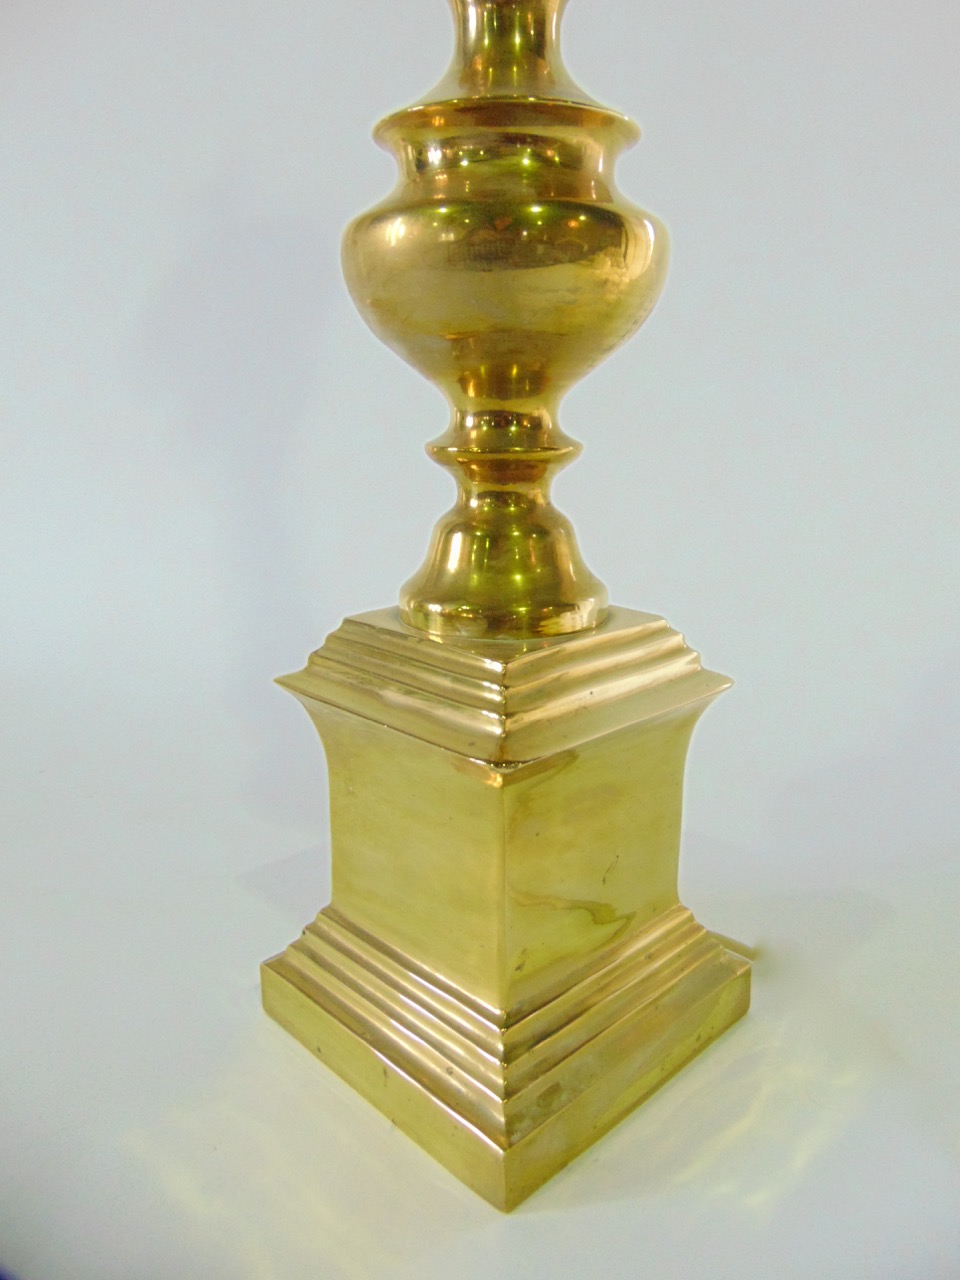 A large ecclesiastical style freestanding cast brass floor lamp, 104 cm high approx. - Image 2 of 3